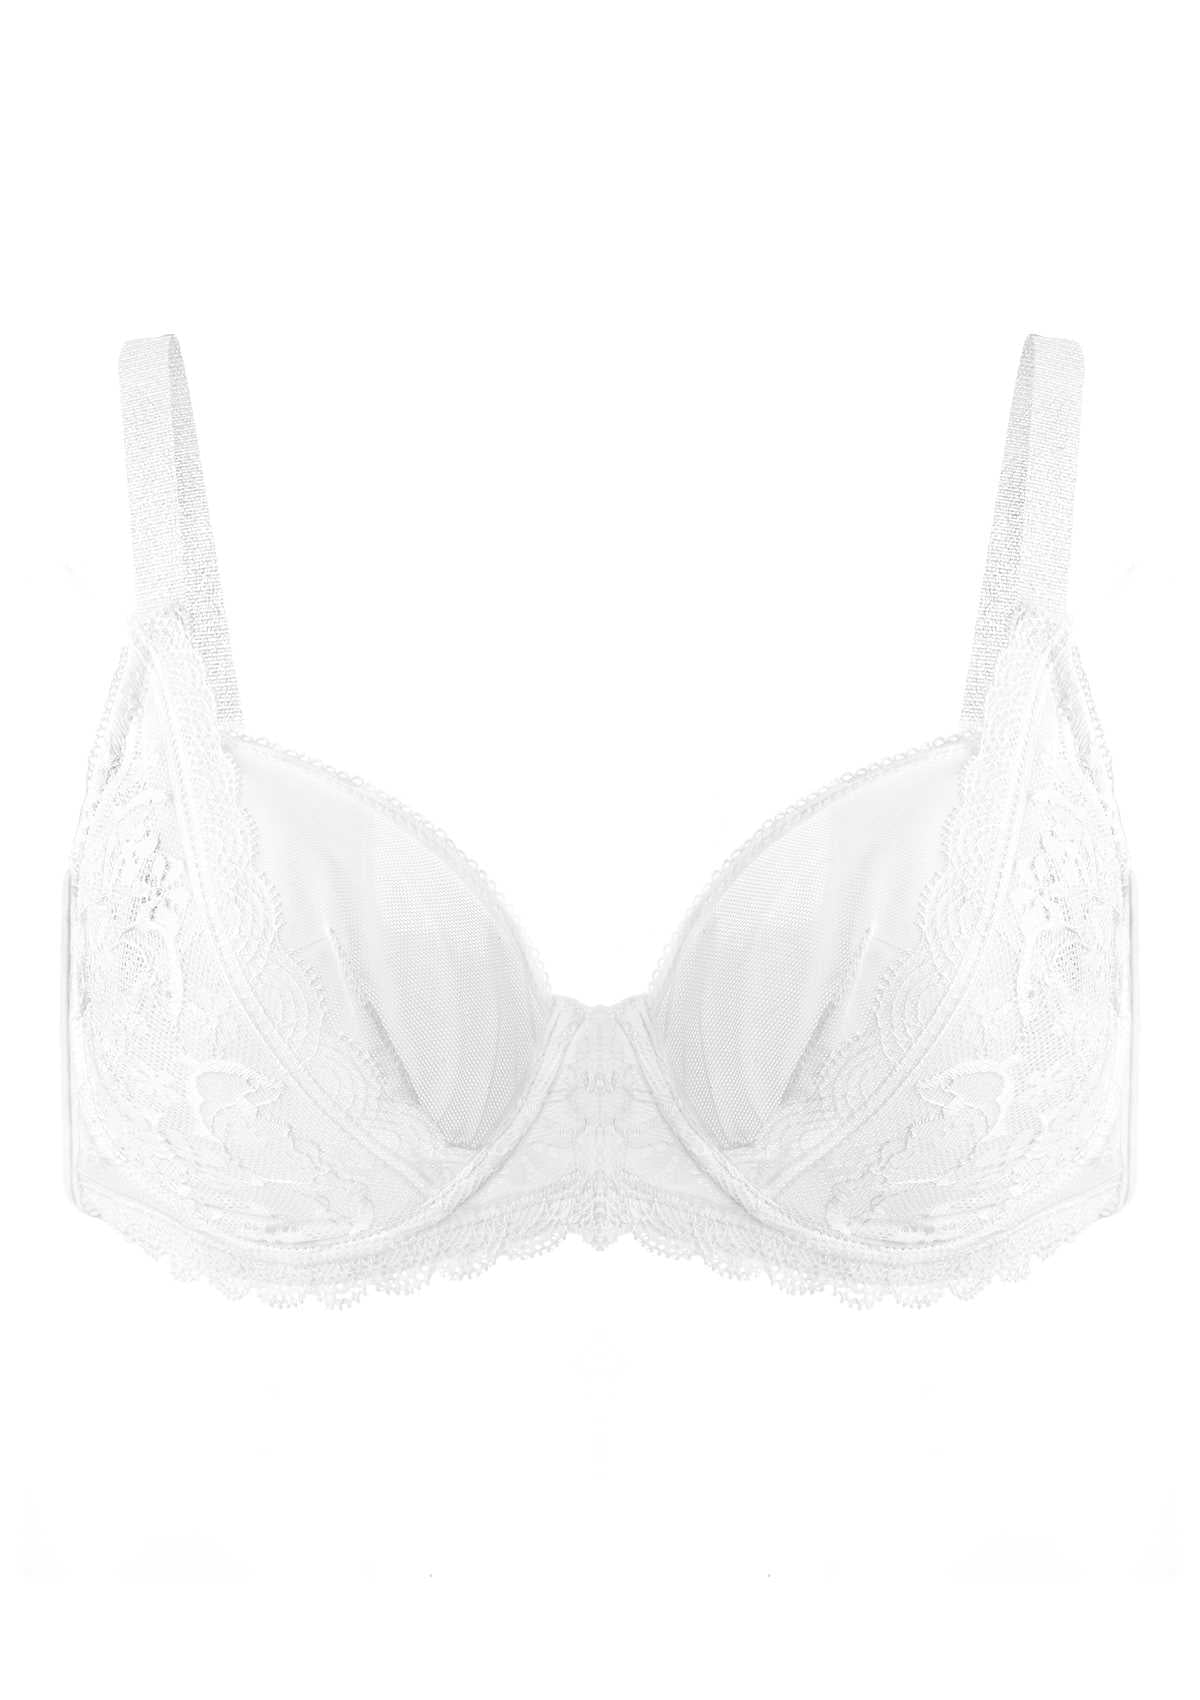 HSIA Anemone Big Bra: Best Bra For Lift And Support, Floral Bra - Light Blue / 38 / DD/E